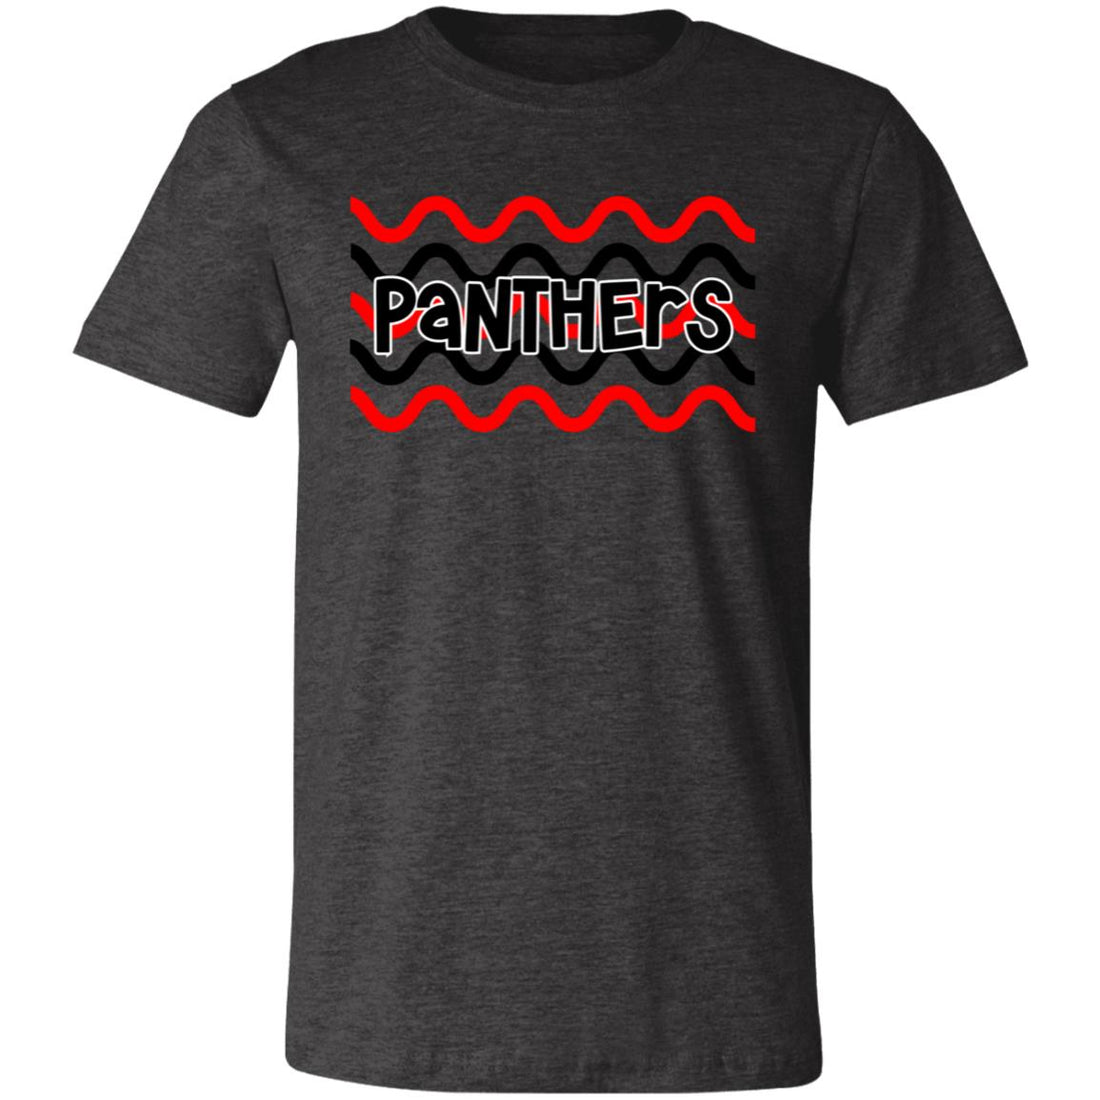 Panthers Wave Unisex Jersey Short-Sleeve T-Shirt - T-Shirts - Positively Sassy - Panthers Wave Unisex Jersey Short-Sleeve T-Shirt